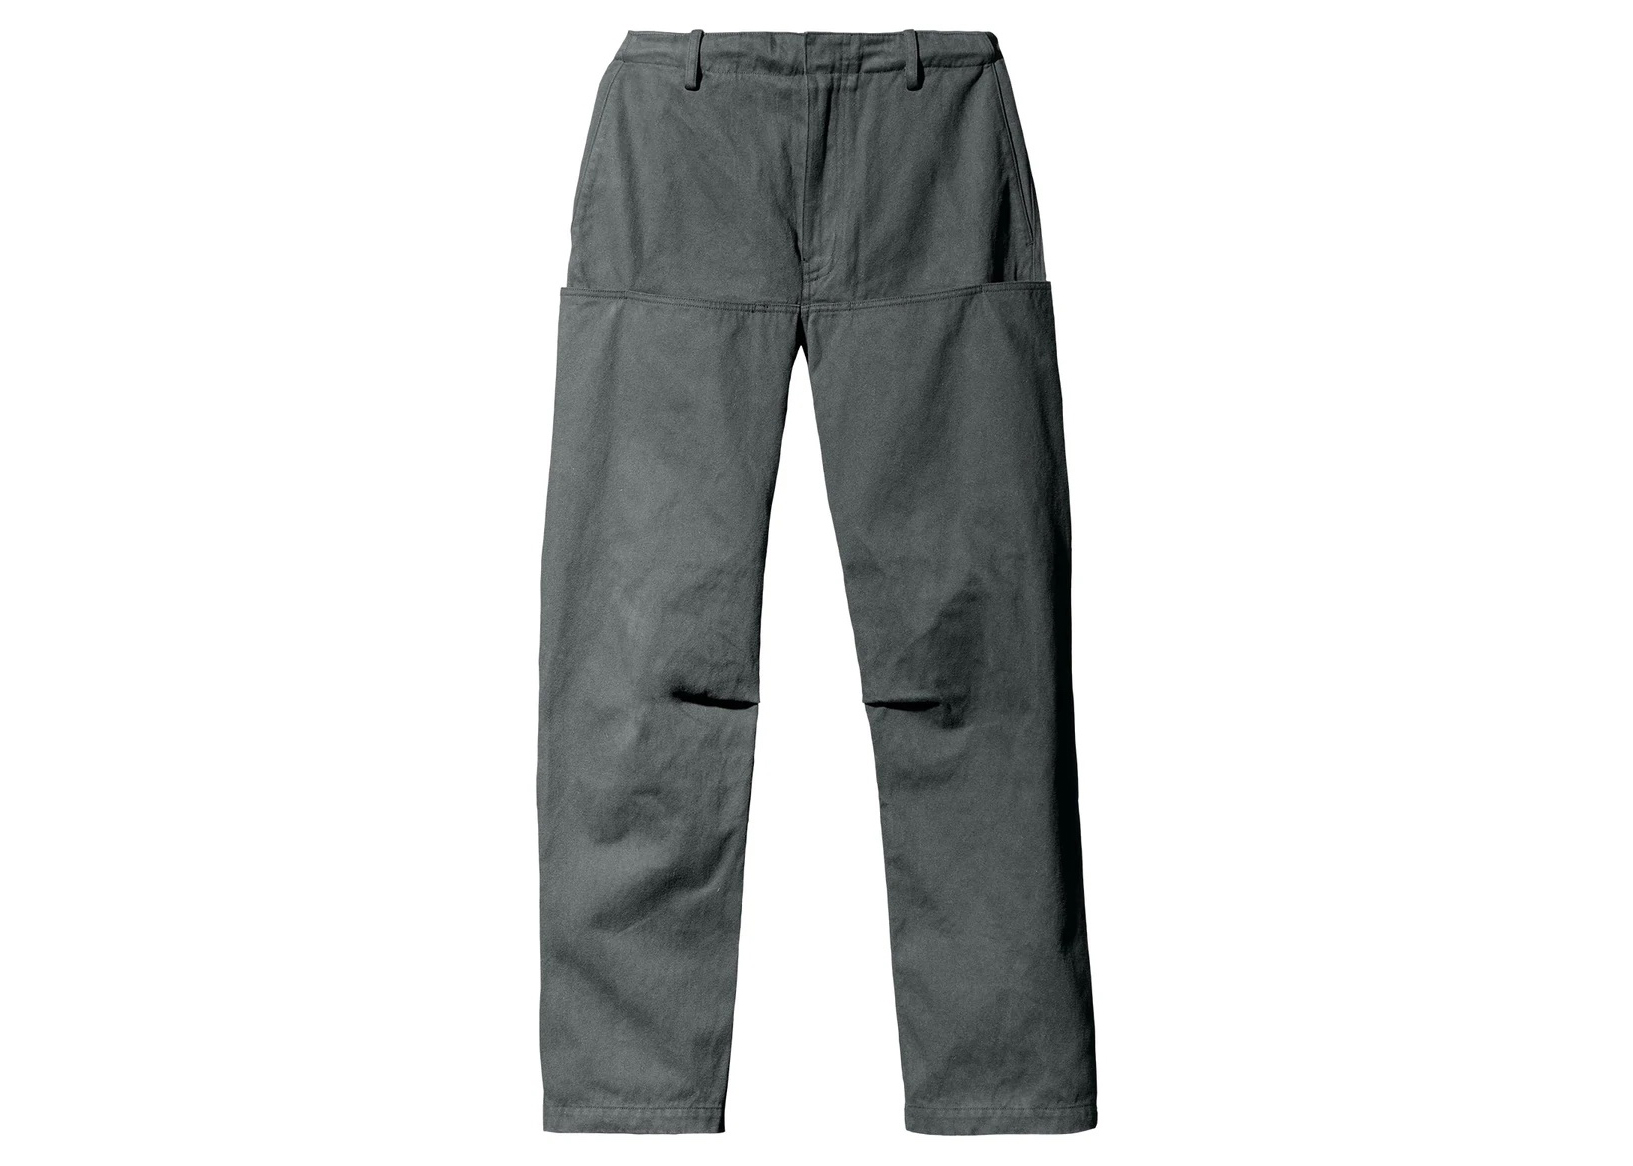 Buy Gap Linen-Cotton Easy Trousers from the Gap online shop